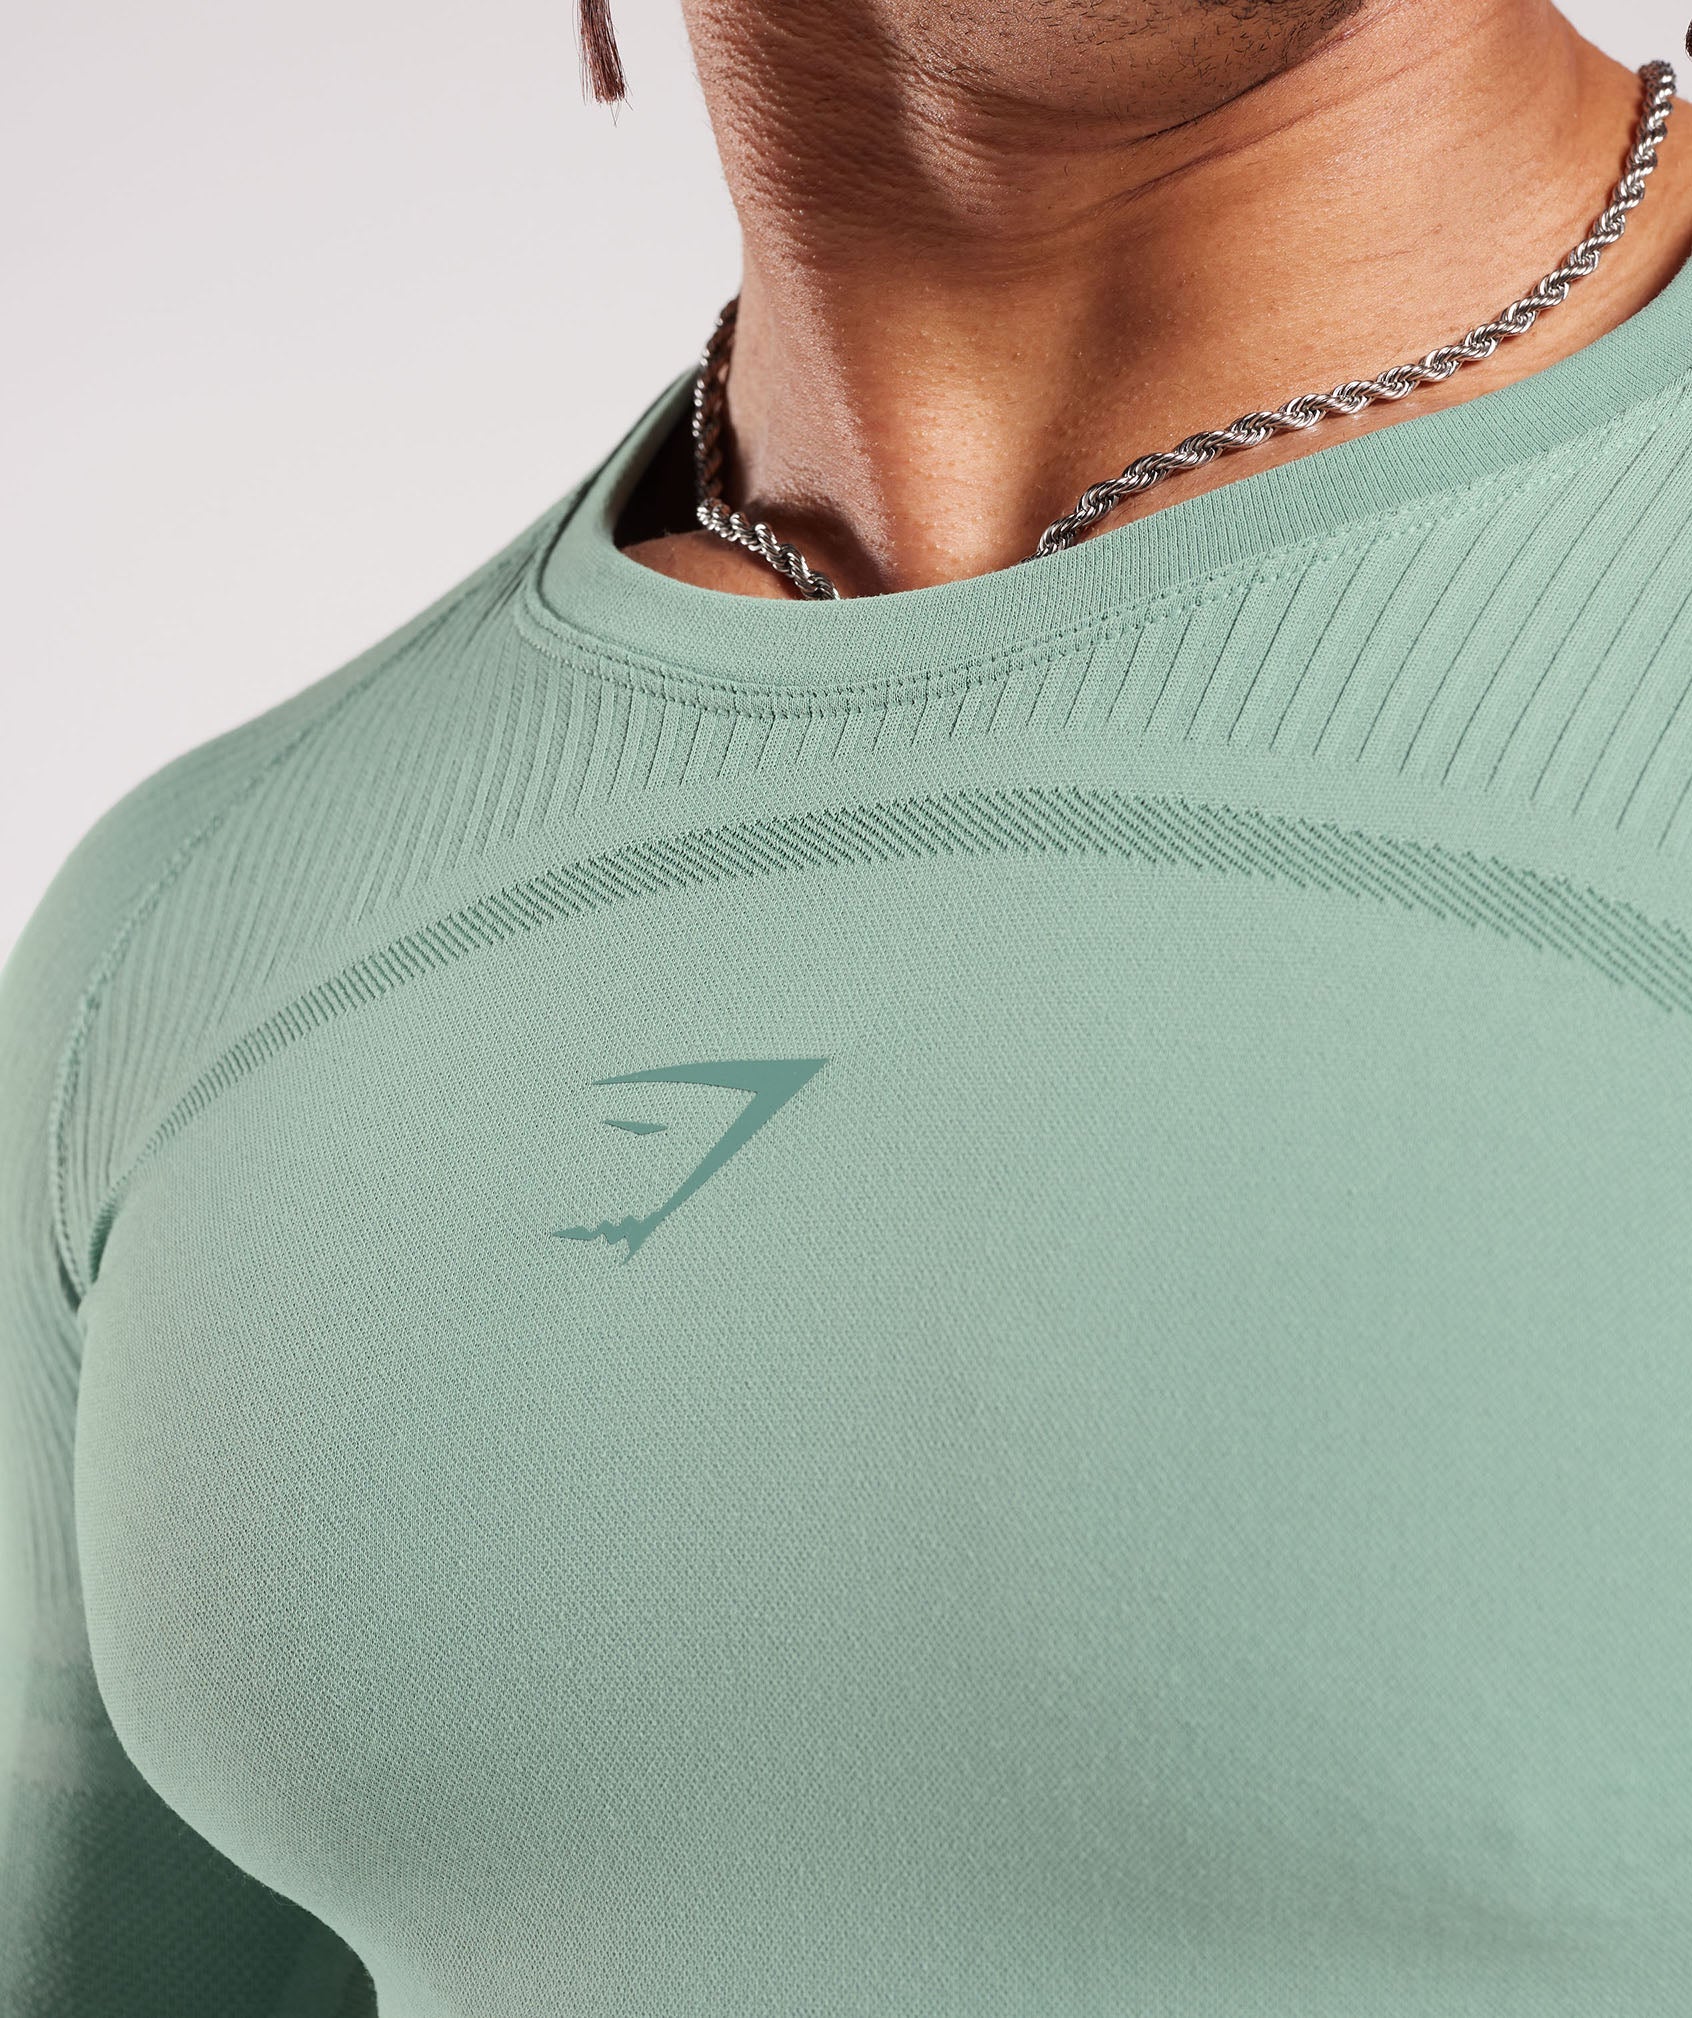 315 Seamless Long Sleeve T-Shirt in Frost Teal/Ink Teal - view 6